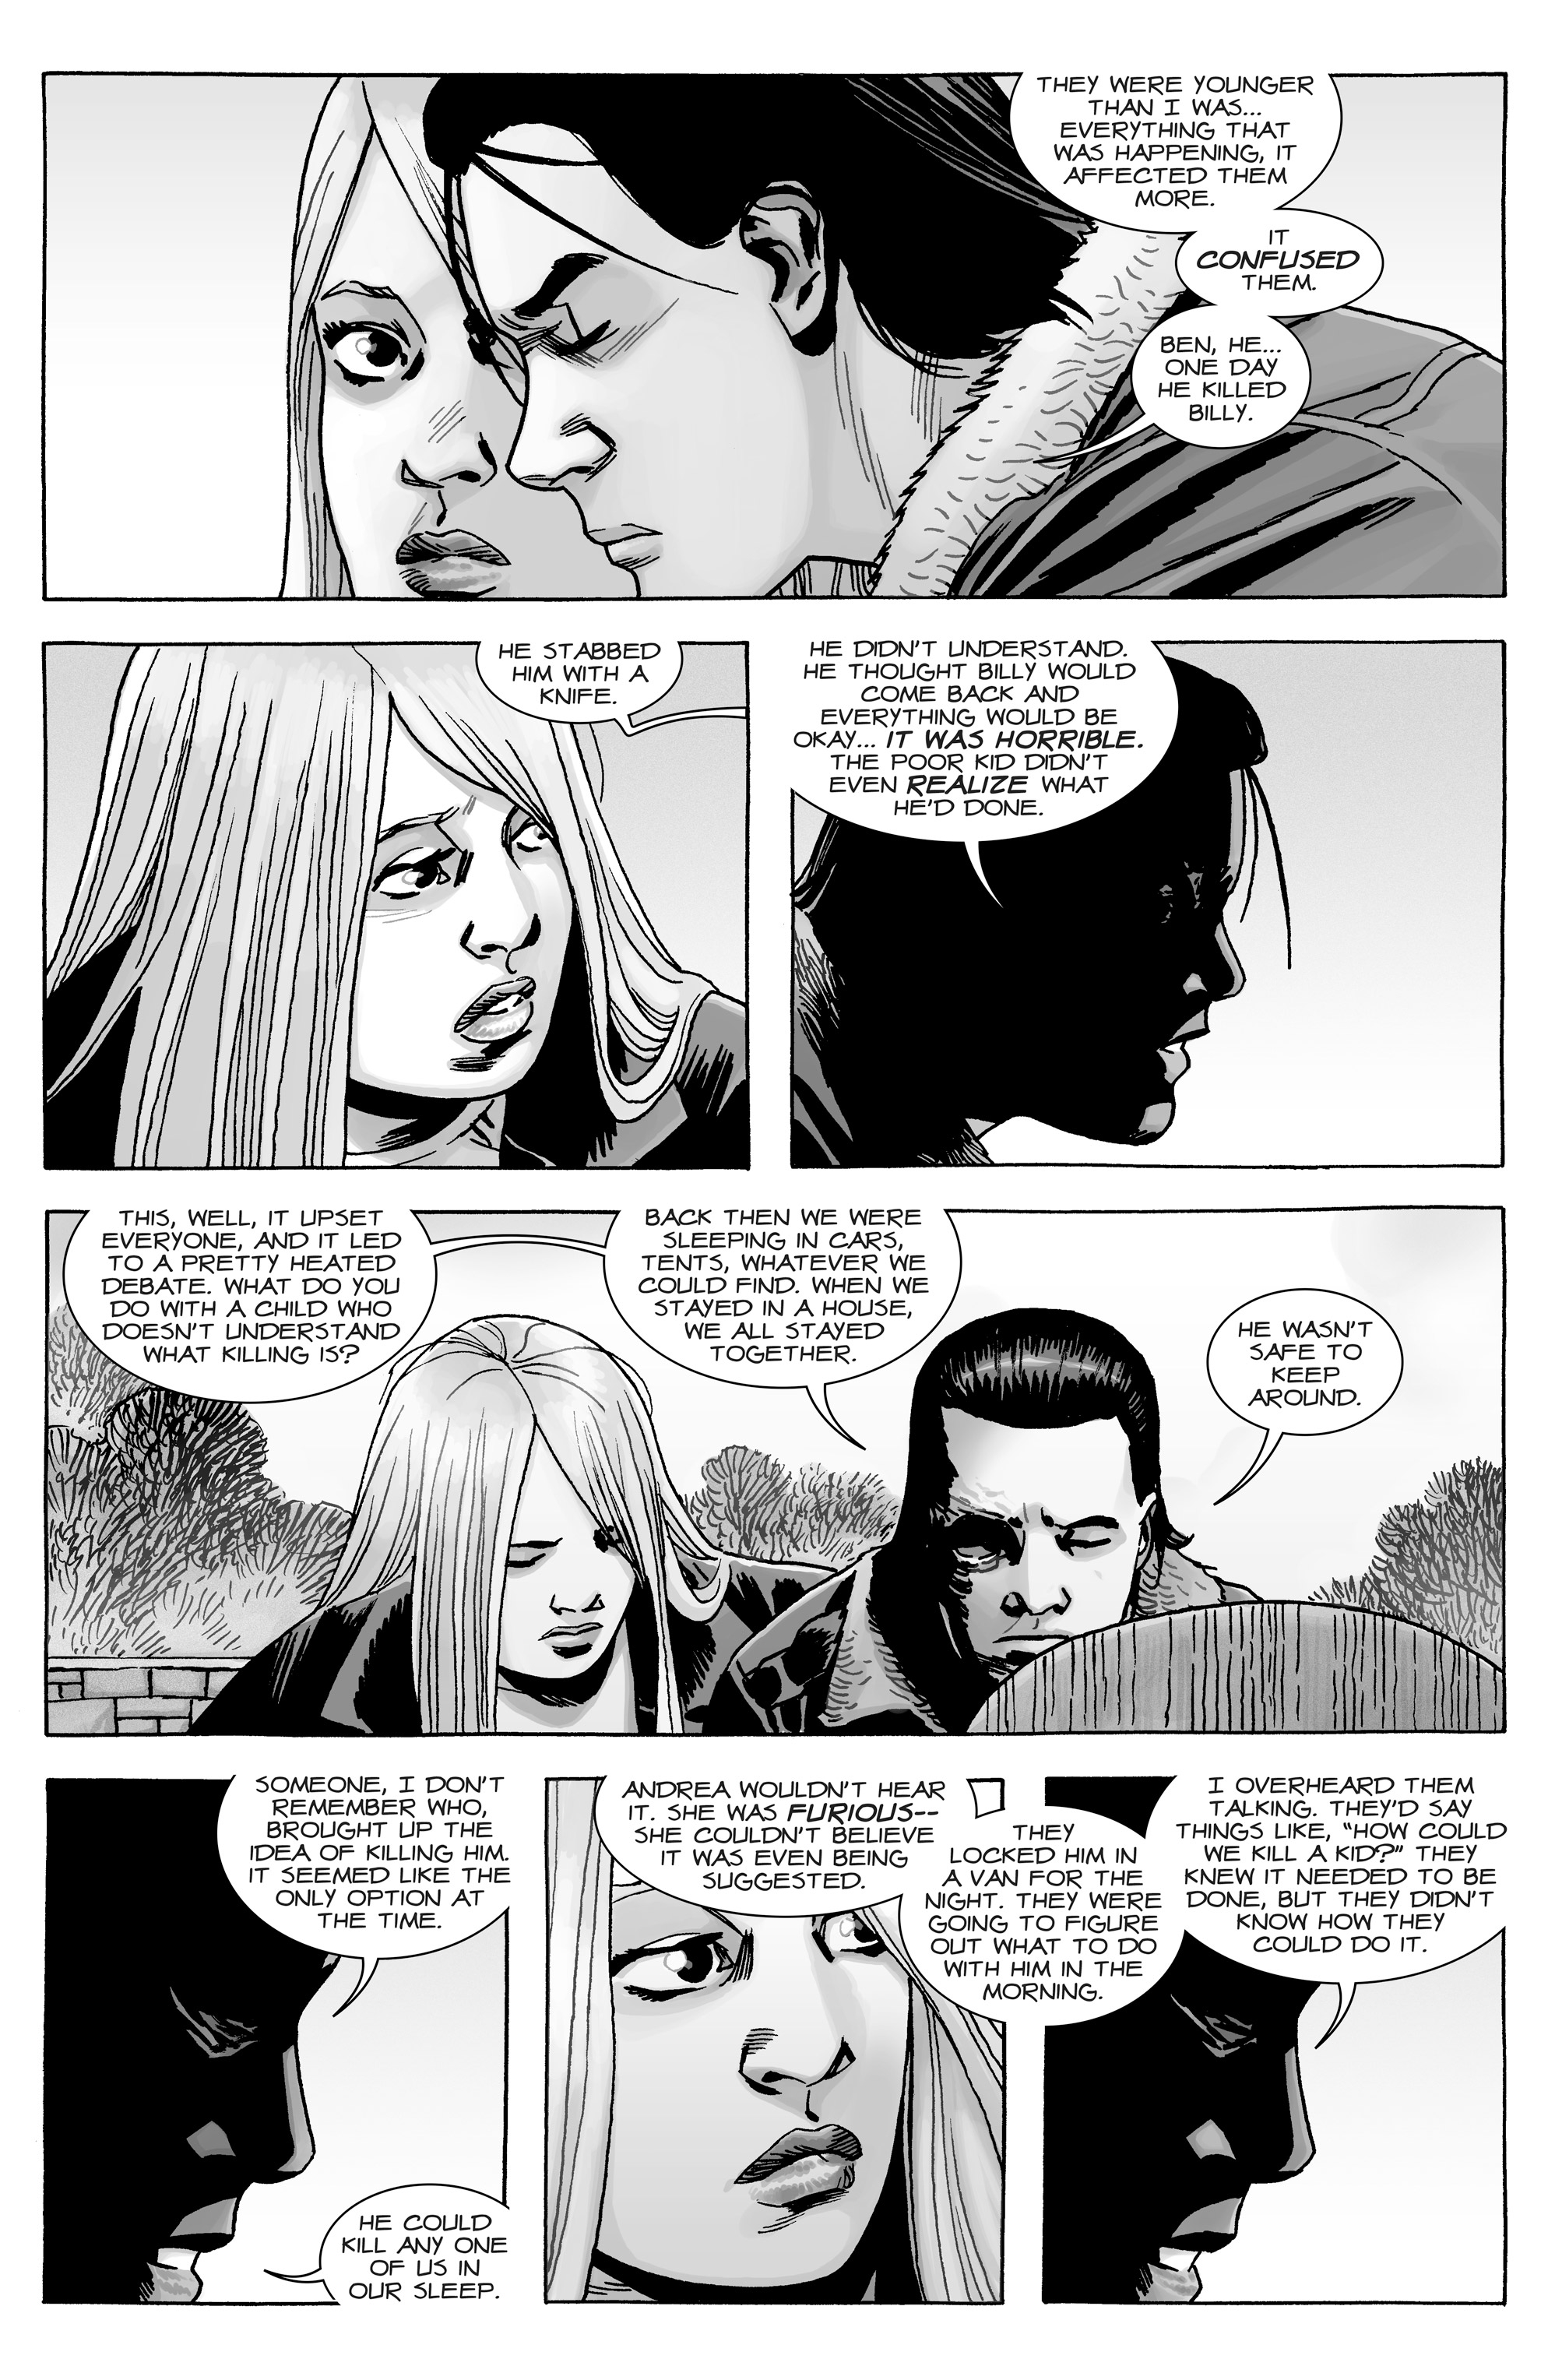 The Walking Dead (2003-): Chapter 169 - Page 4